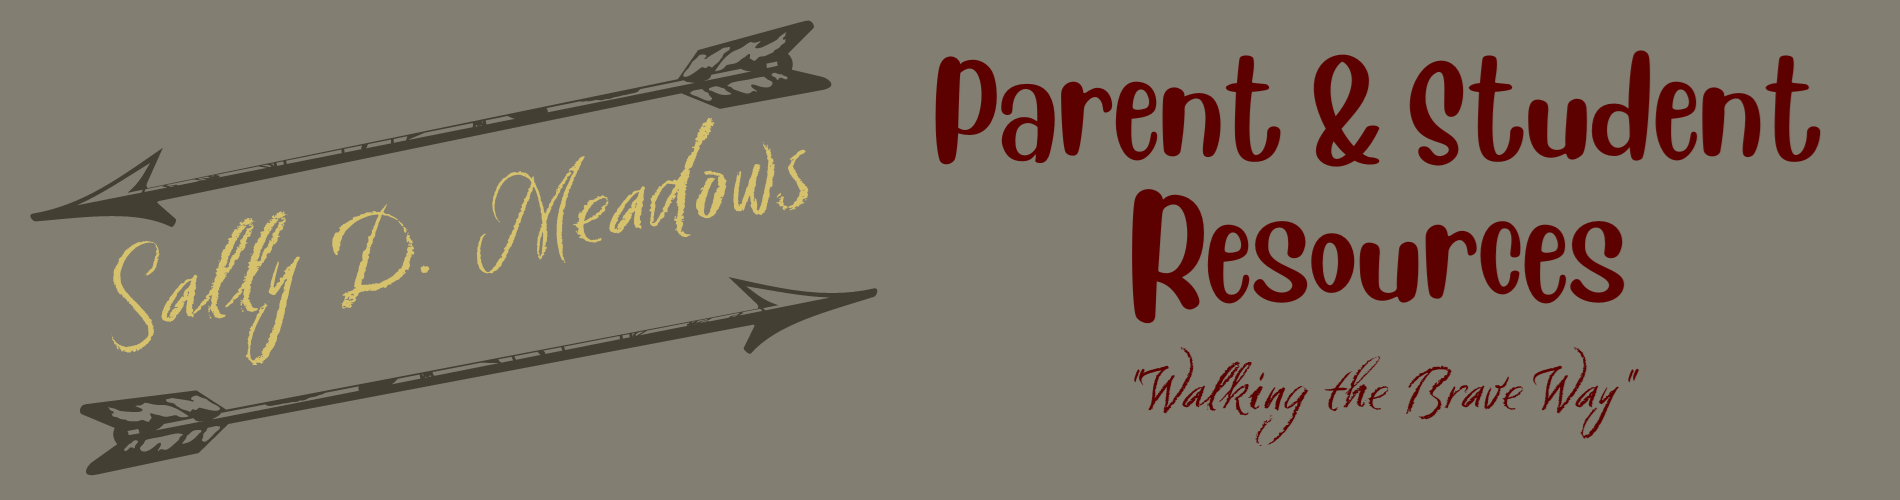 Parent and Student Resources